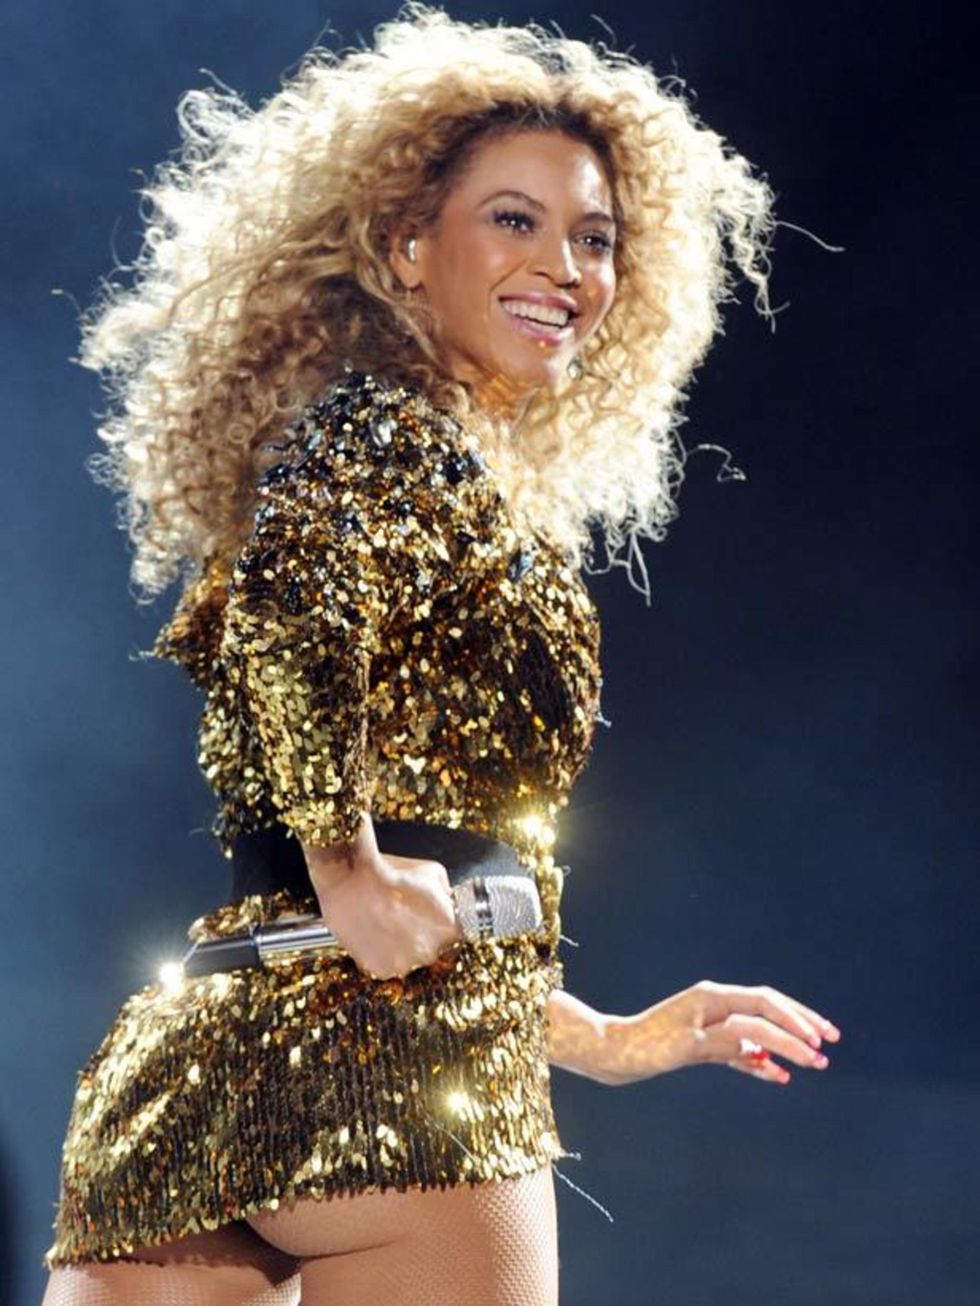 <p>Like it could be anyone else. 2011 was the year that <a href="http://www.elleuk.com/starstyle/style-files/(section)/beyonce">Beyonce </a>stepped up to run the world. <a href="http://www.elleuk.com/news/star-style-news/beyonce-runs-glastonbury">She domi